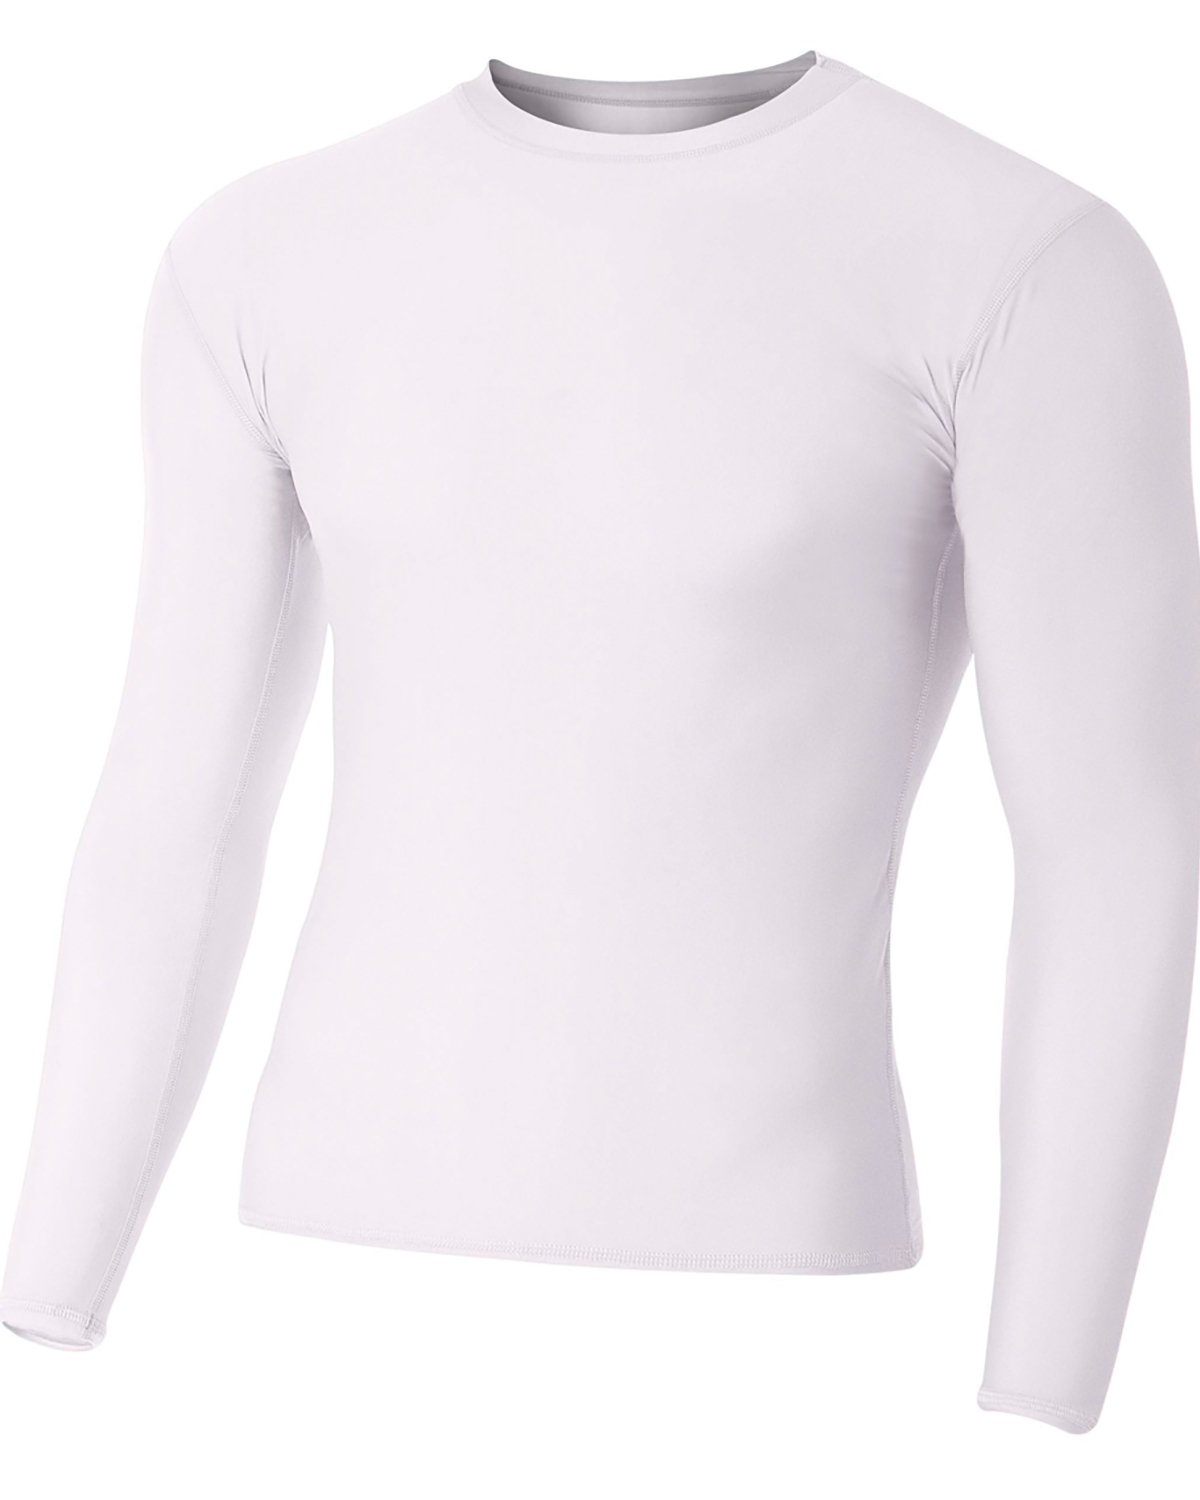 Adult Polyester Spandex Long Sleeve Compression T-Shirt-A4